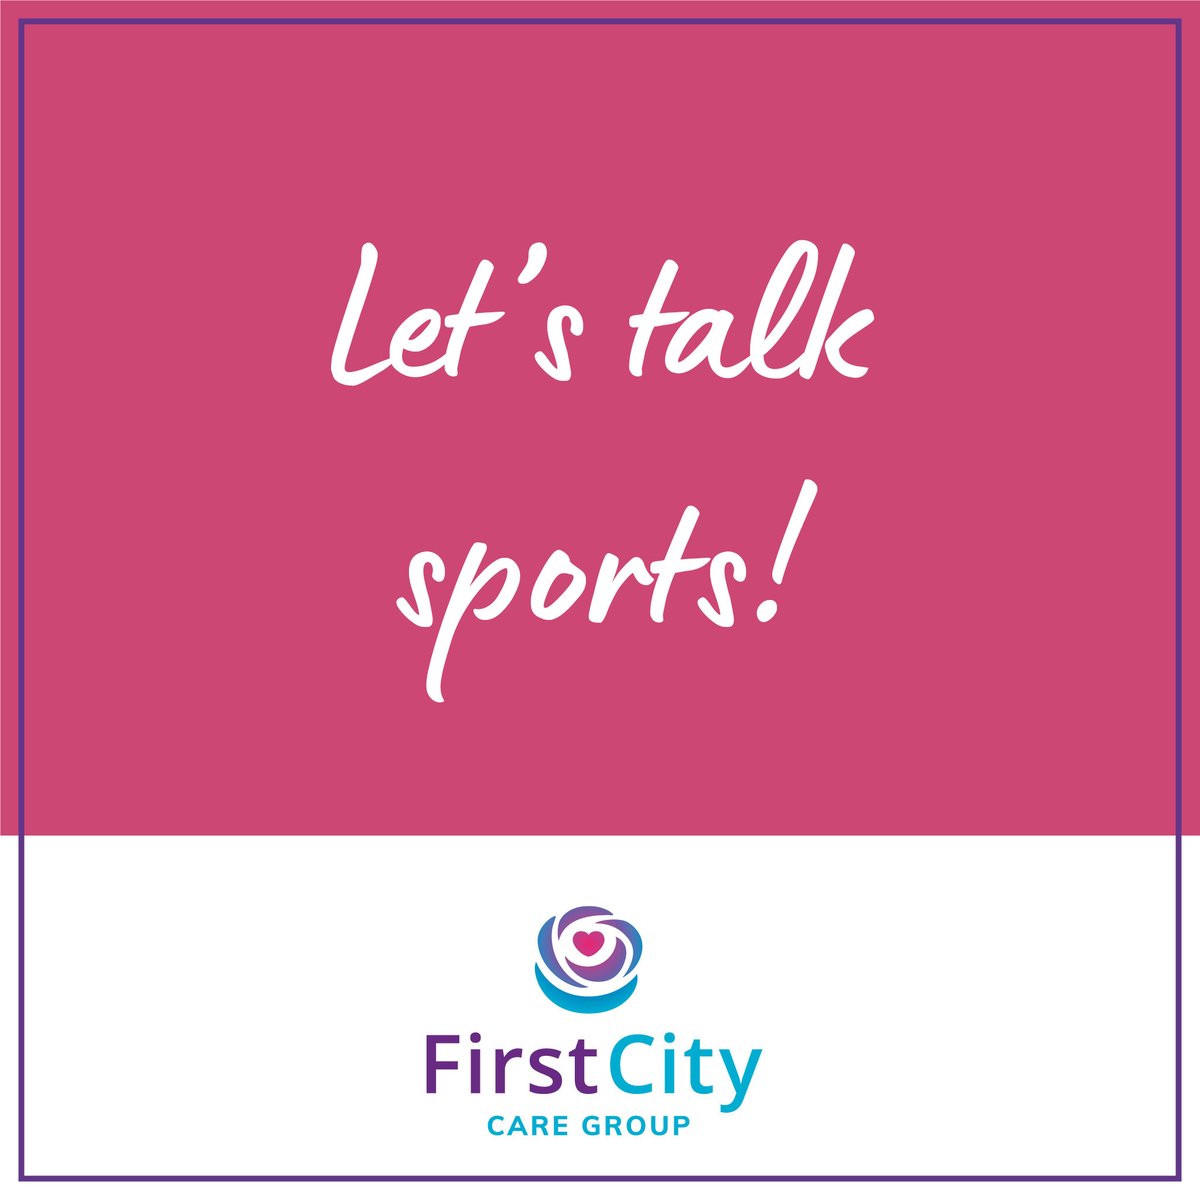 Last week we asked about football - this week we'd love to know what other sports you follow?

#TuesdayThoughts #TuesdayTopic #Gettoknowyourcolleagues #gettoknowme #Shareyourthoughts